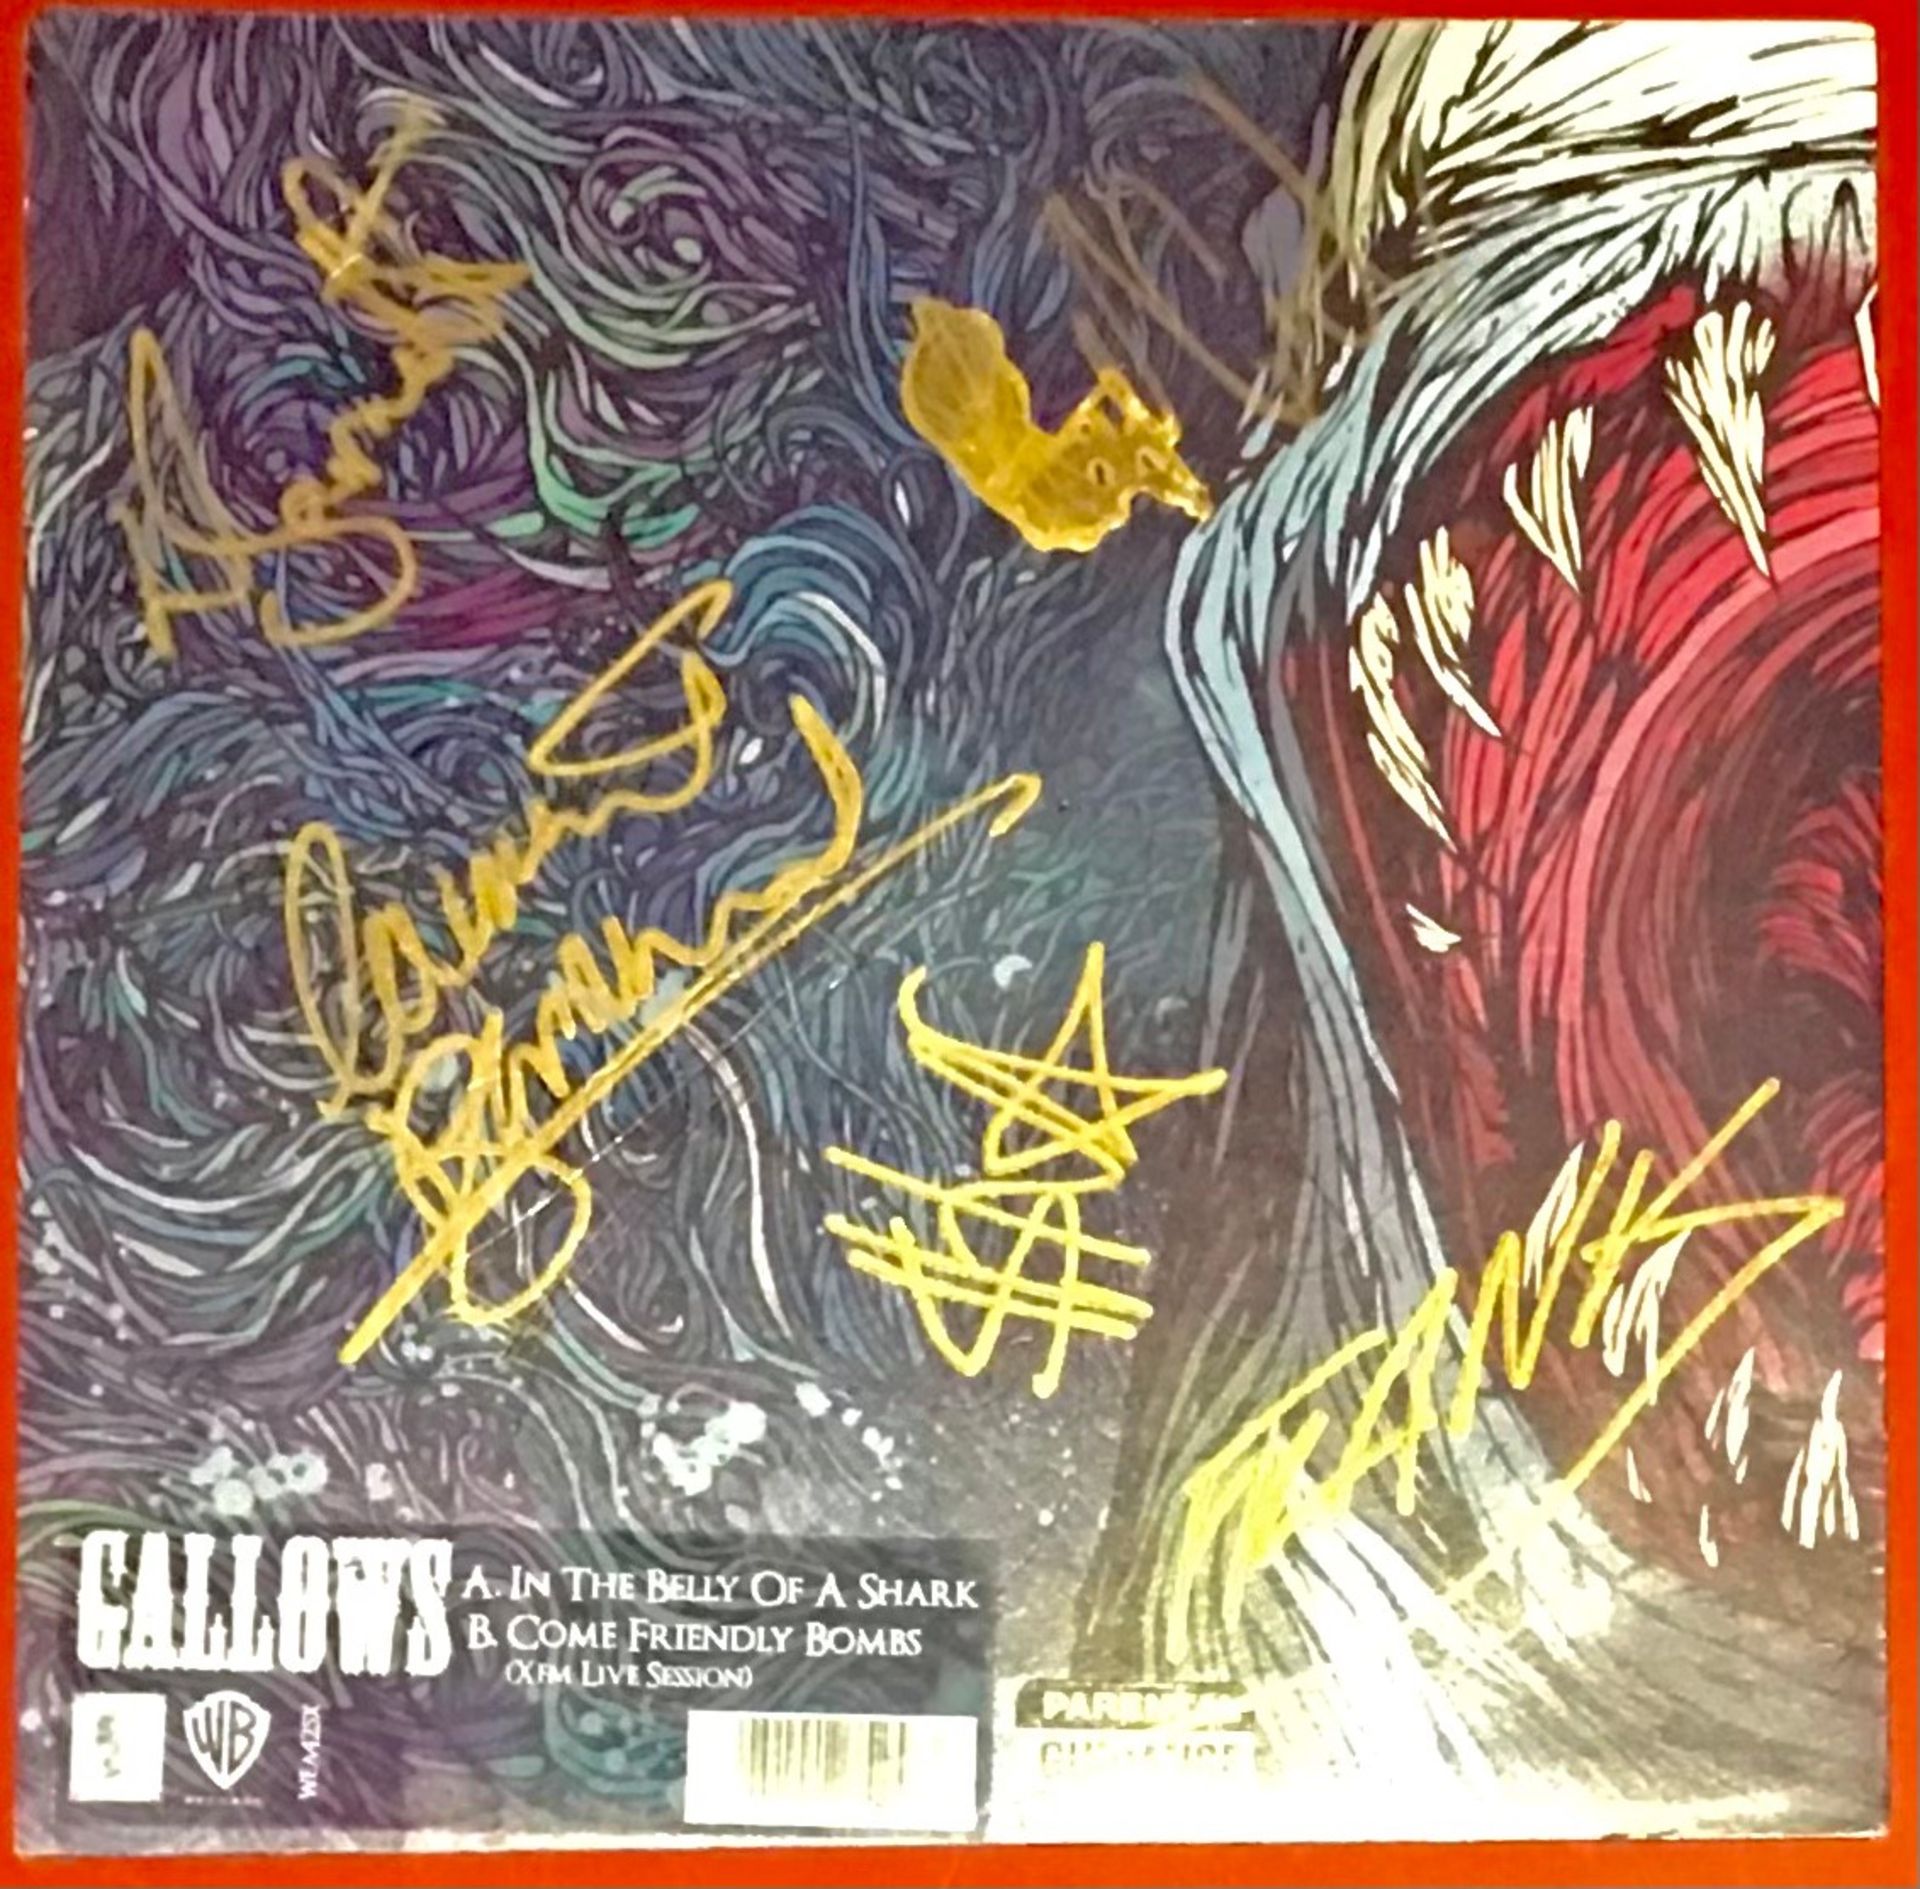 GALLOWS SIGNED 7” VINYL SINGLE. This is a blue vinyl of the song - In The Belly Of A Shark - signed